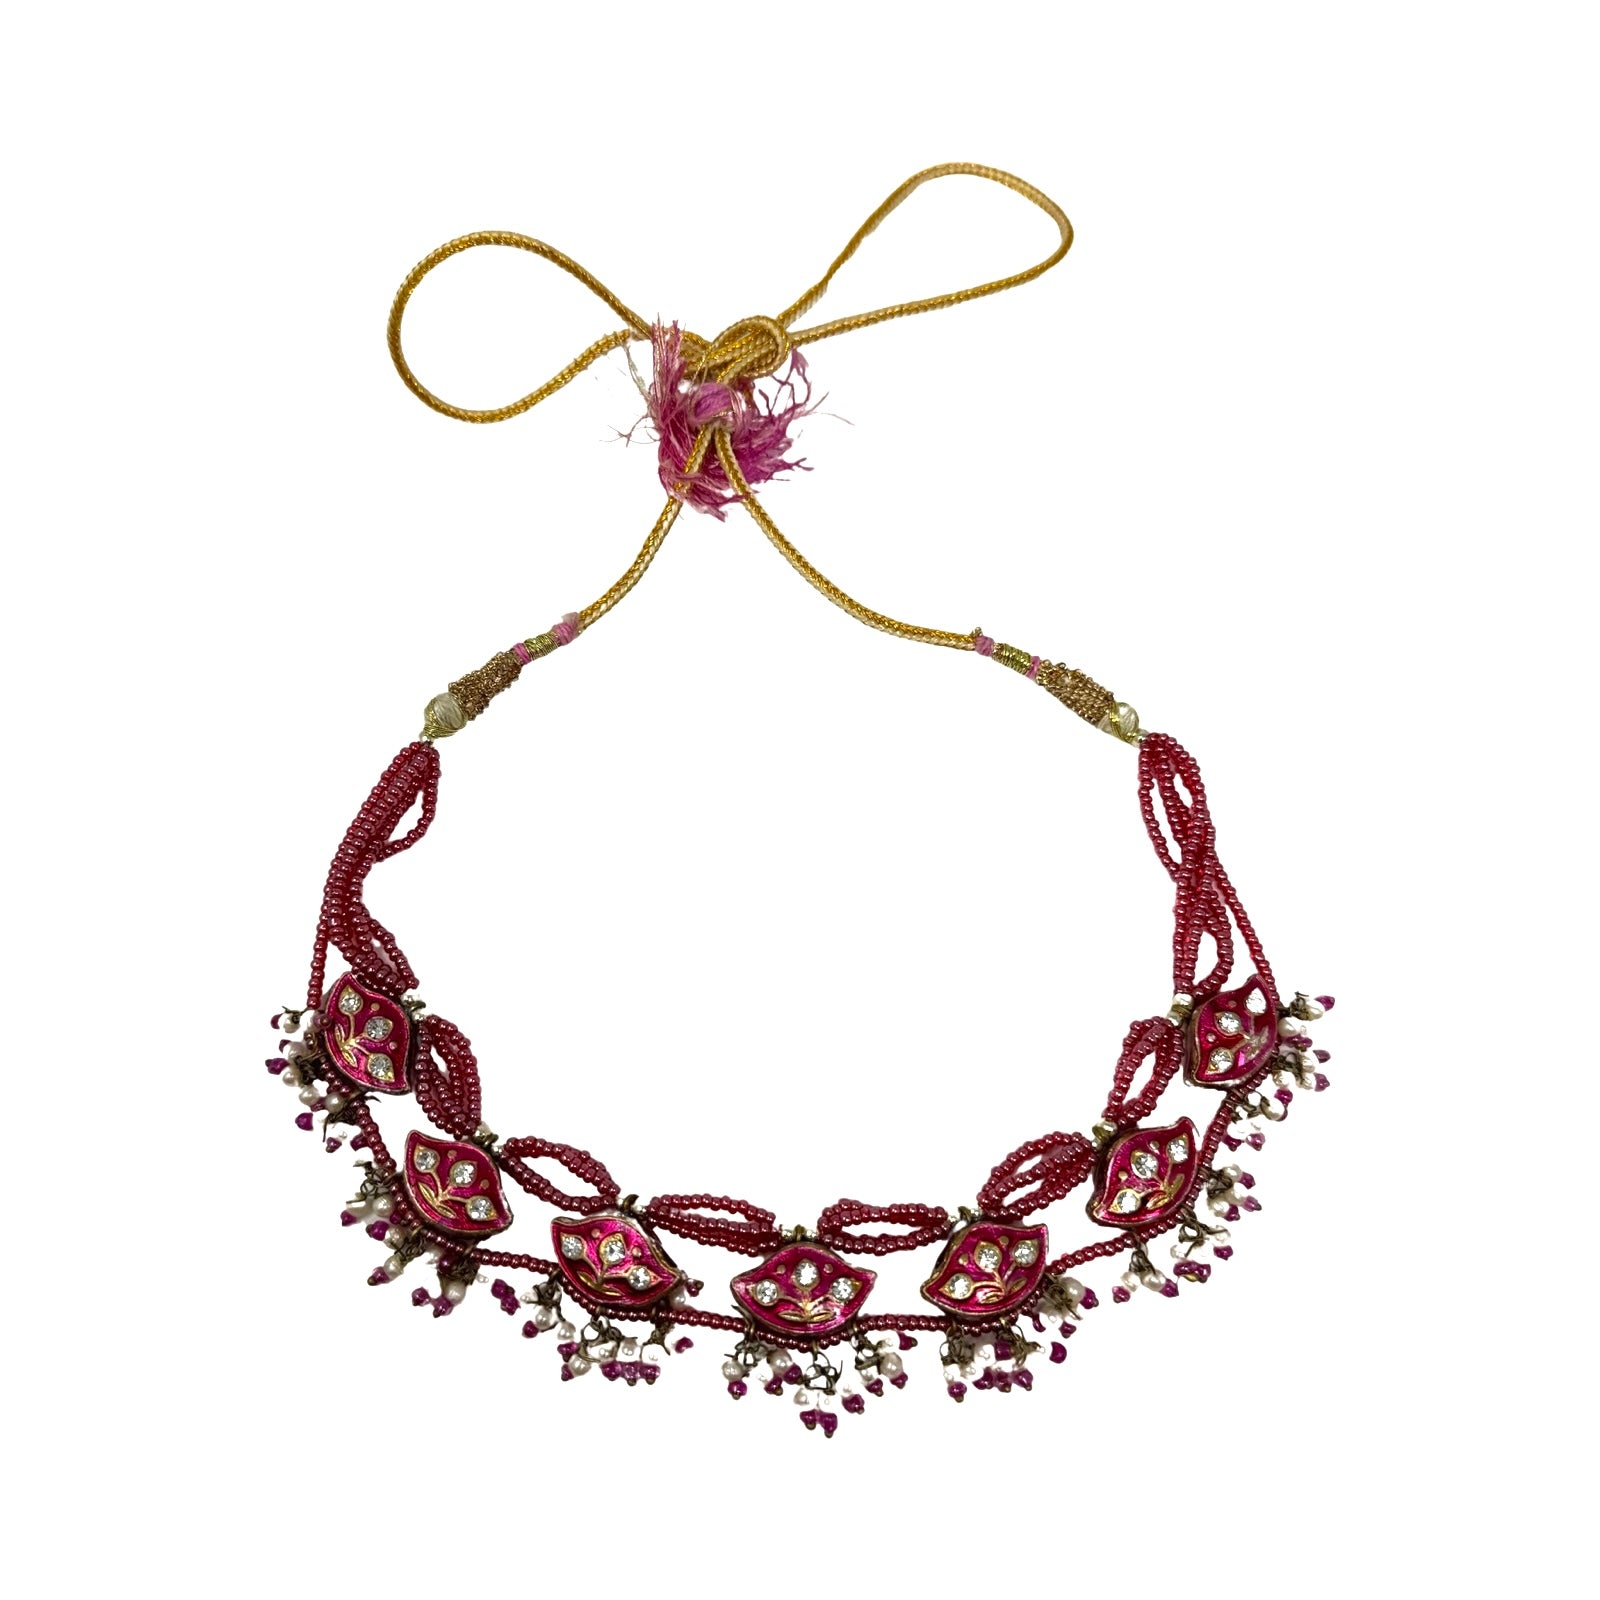 Beaded And Embellished Adjustable Cord Necklace